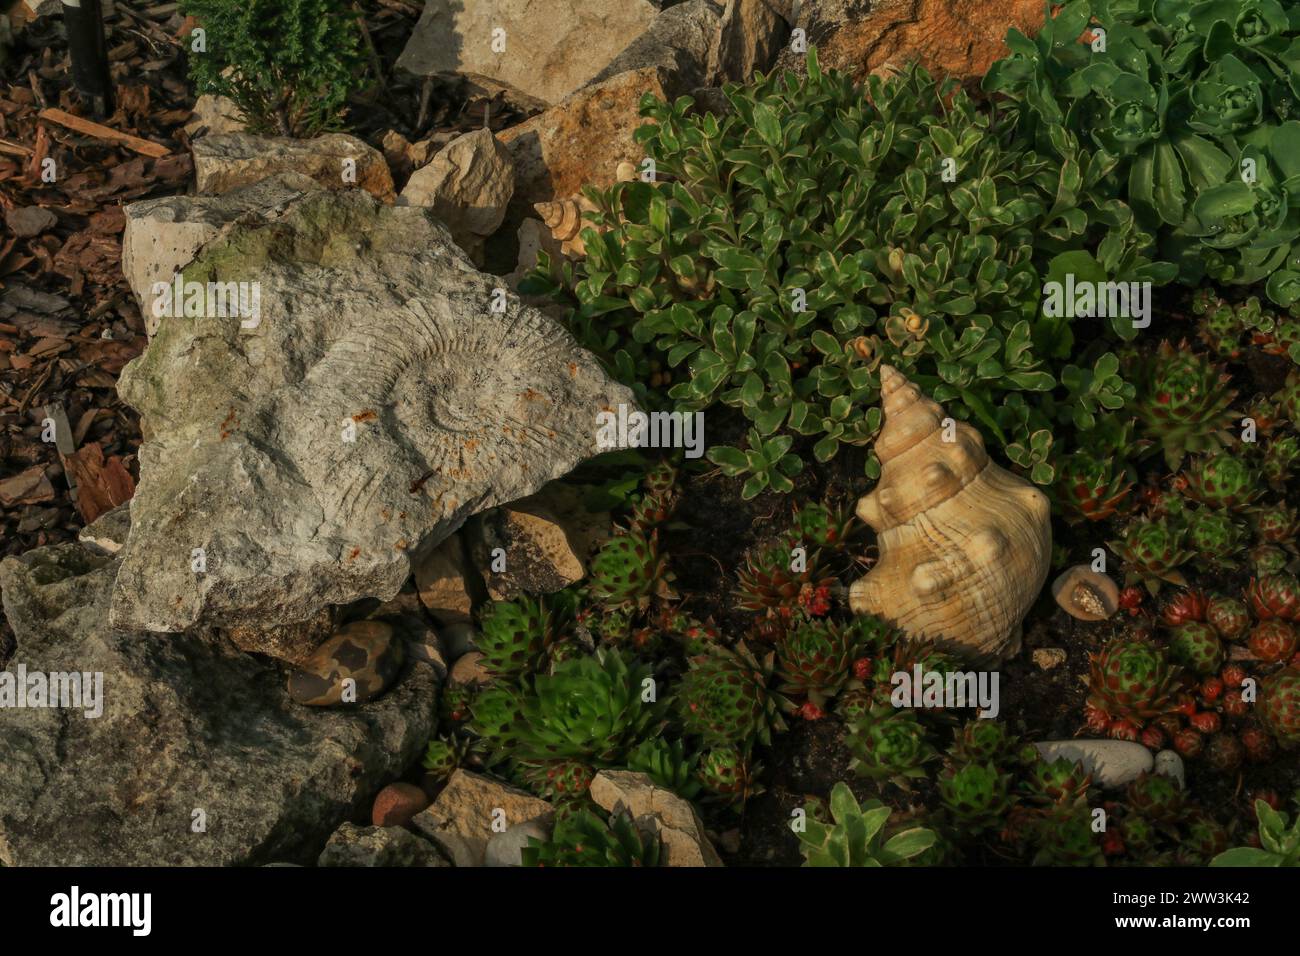 Ammonites and fossils of prehistoric animals imprinted in stone in the garden Stock Photo